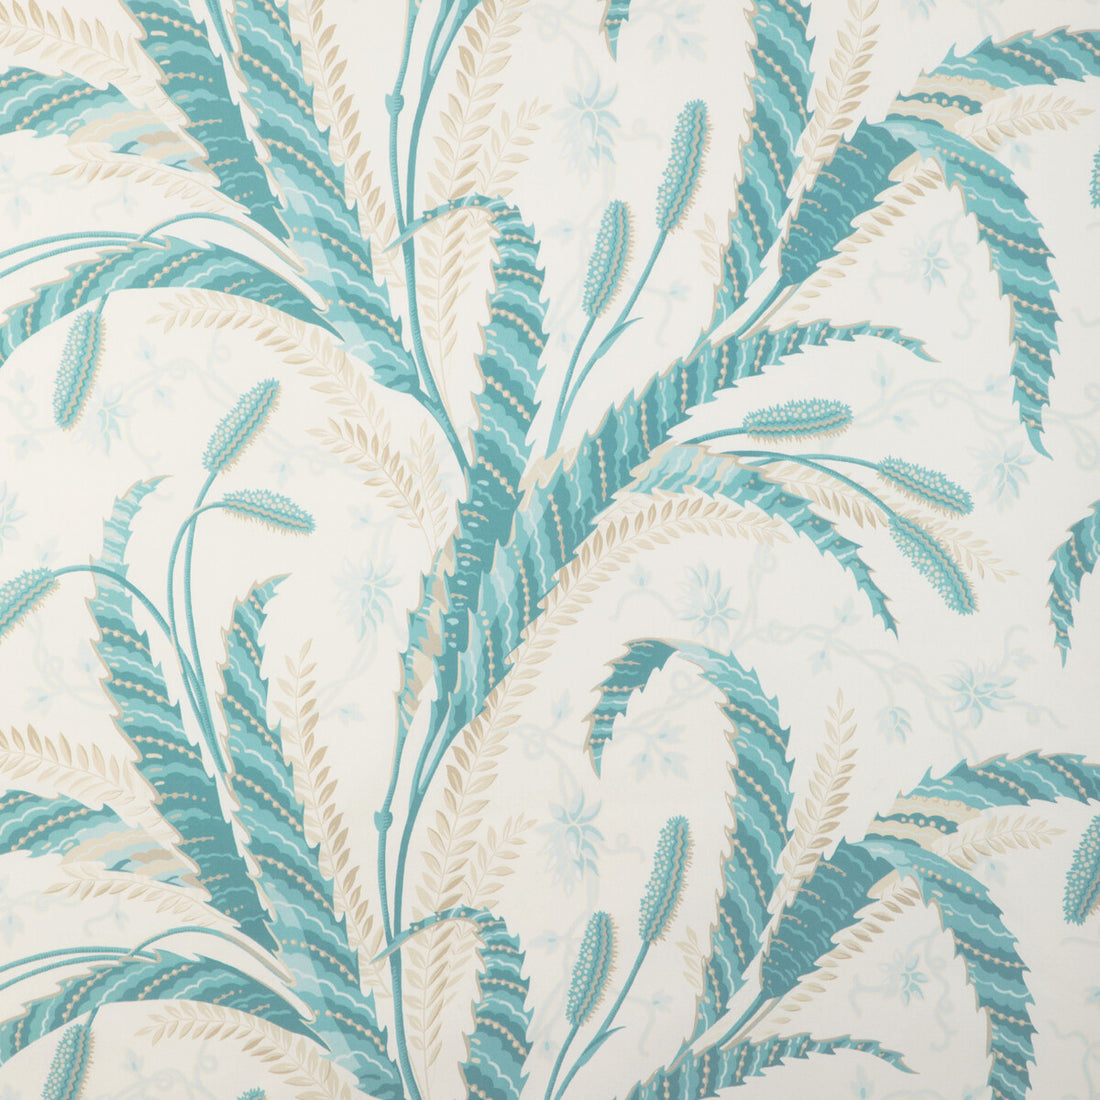 Vernay Print fabric in aqua color - pattern 8023101.13.0 - by Brunschwig &amp; Fils in the Cadenet collection